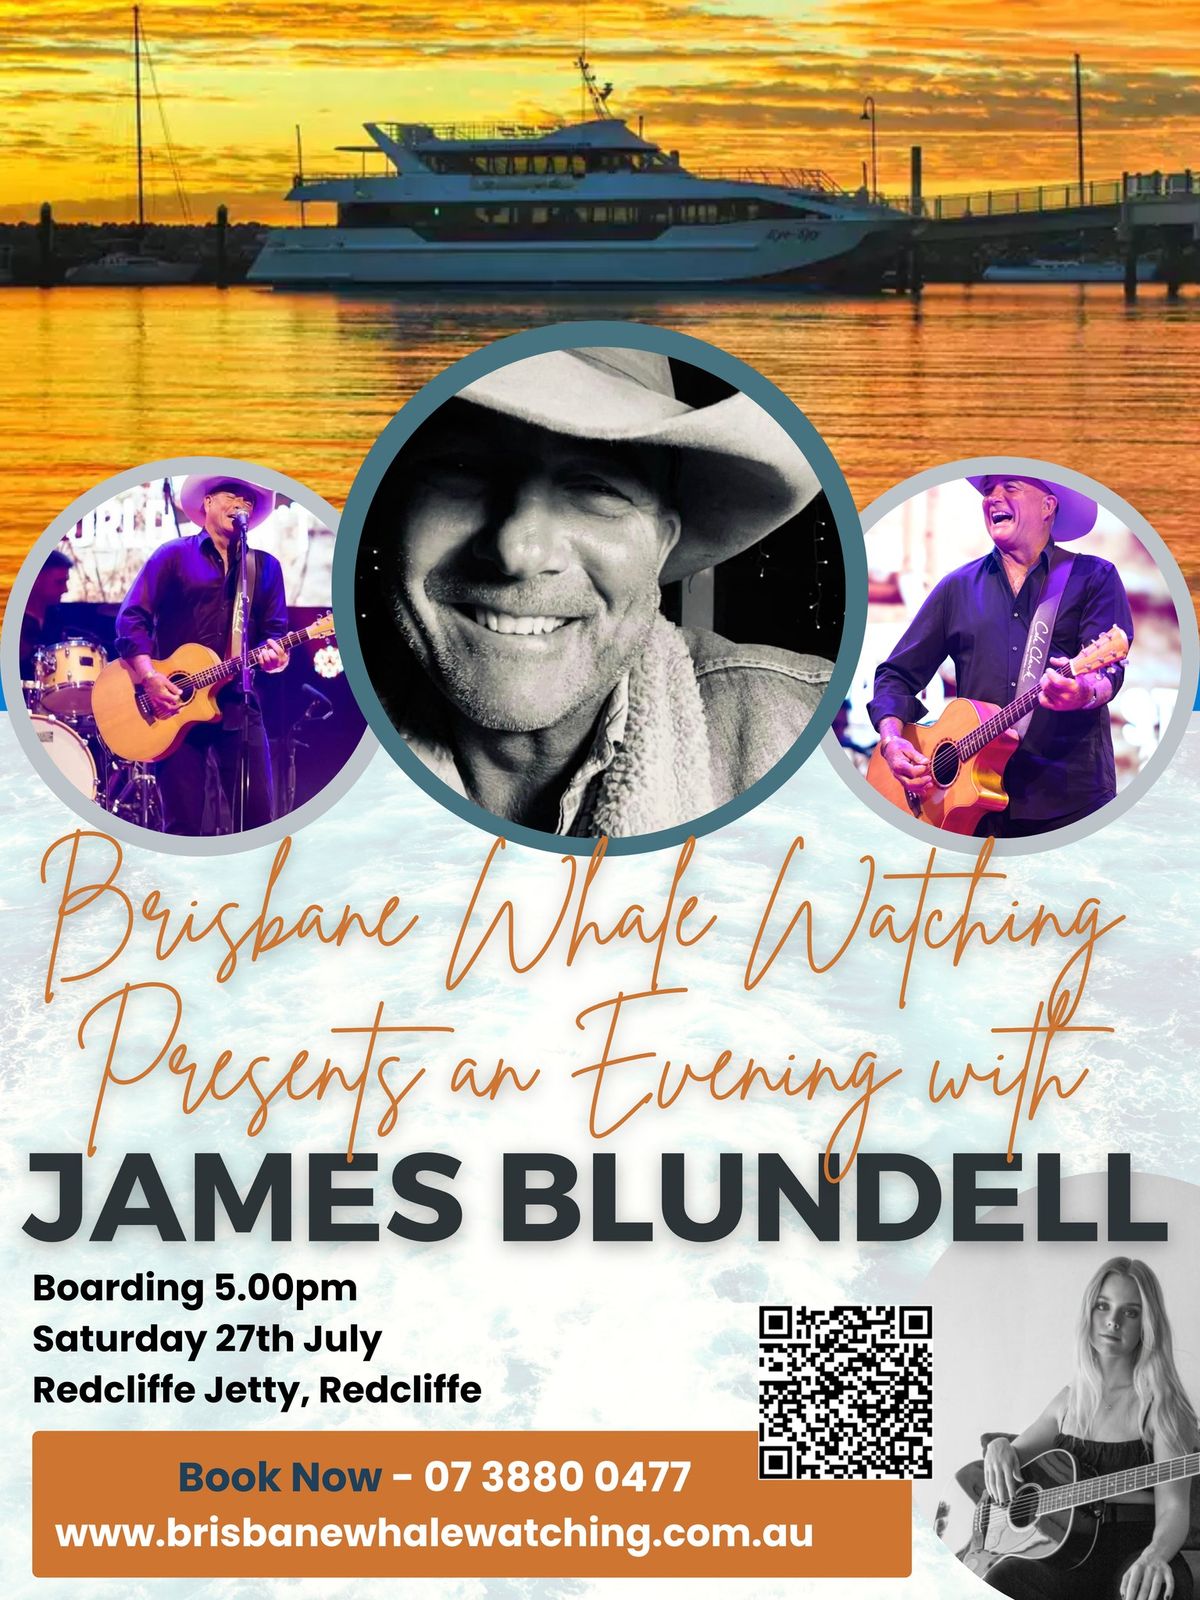 Brisbane Whale Watching Presents an Evening with James Blundell